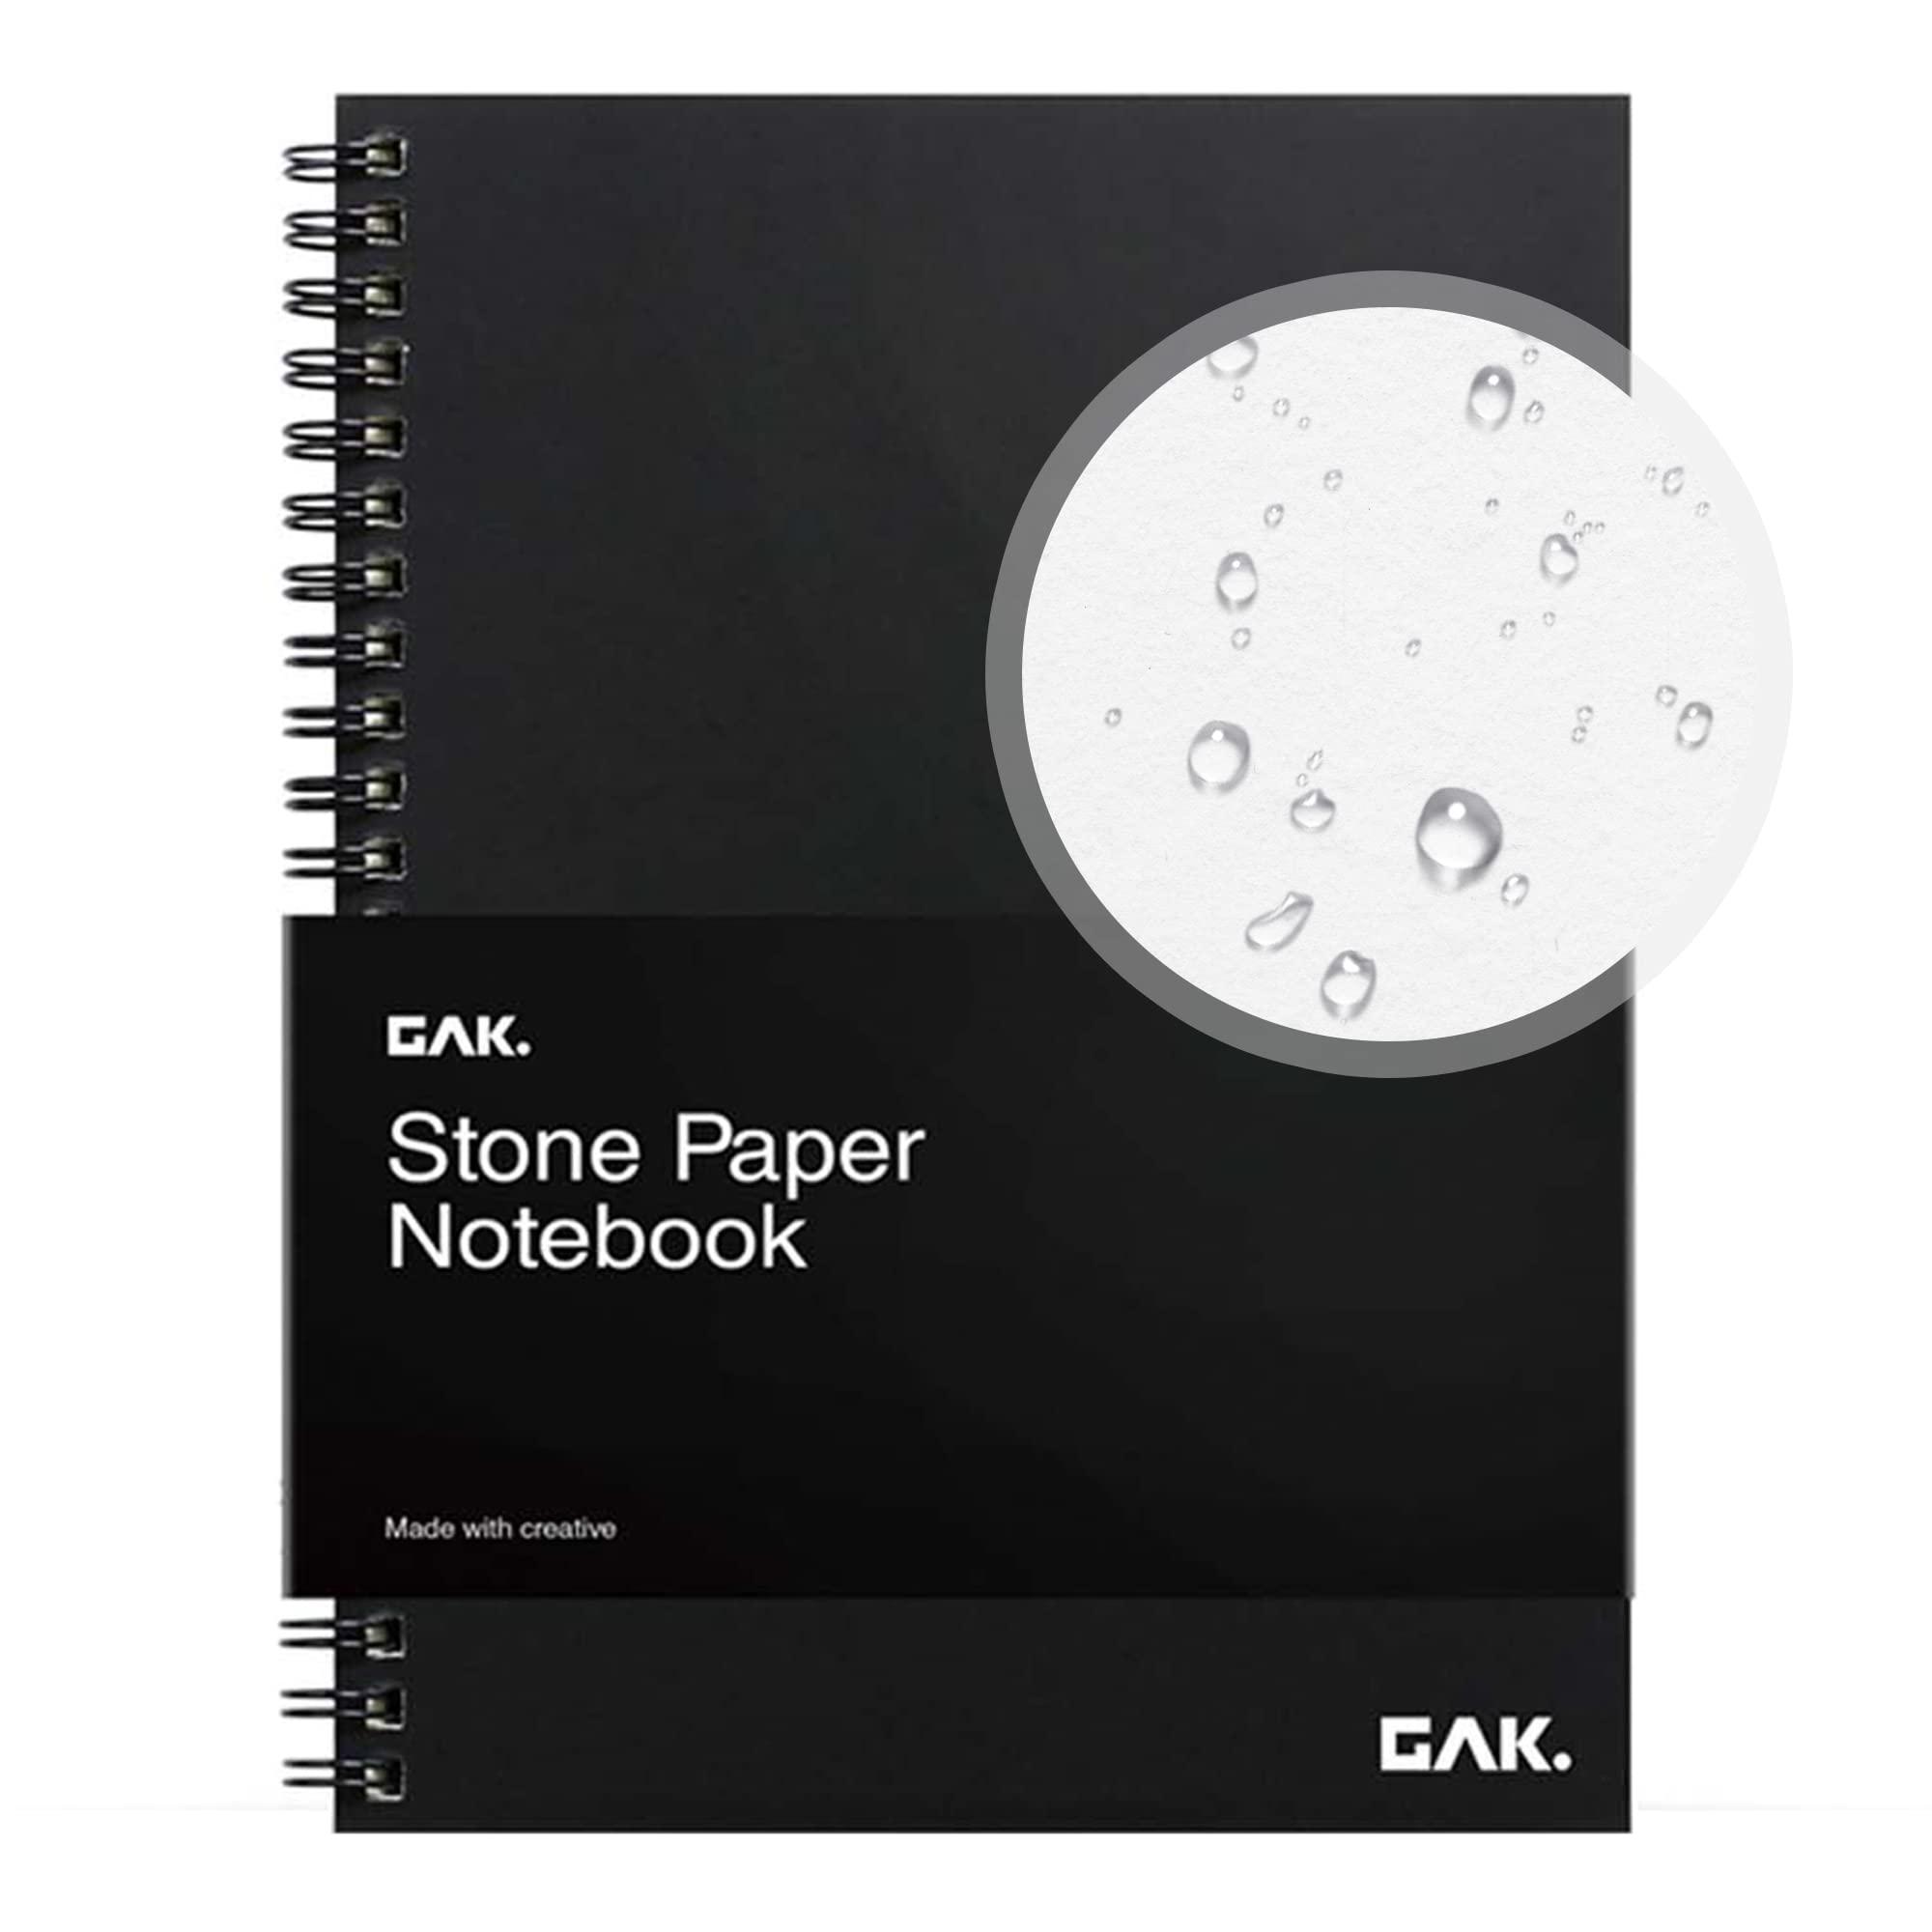 GAK. Stone Paper Notebook | No Lines Spiral Notebook Waterproof Sheet Aesthetic Journal for Note Taking | Notebooks for Work & Aesthetic School